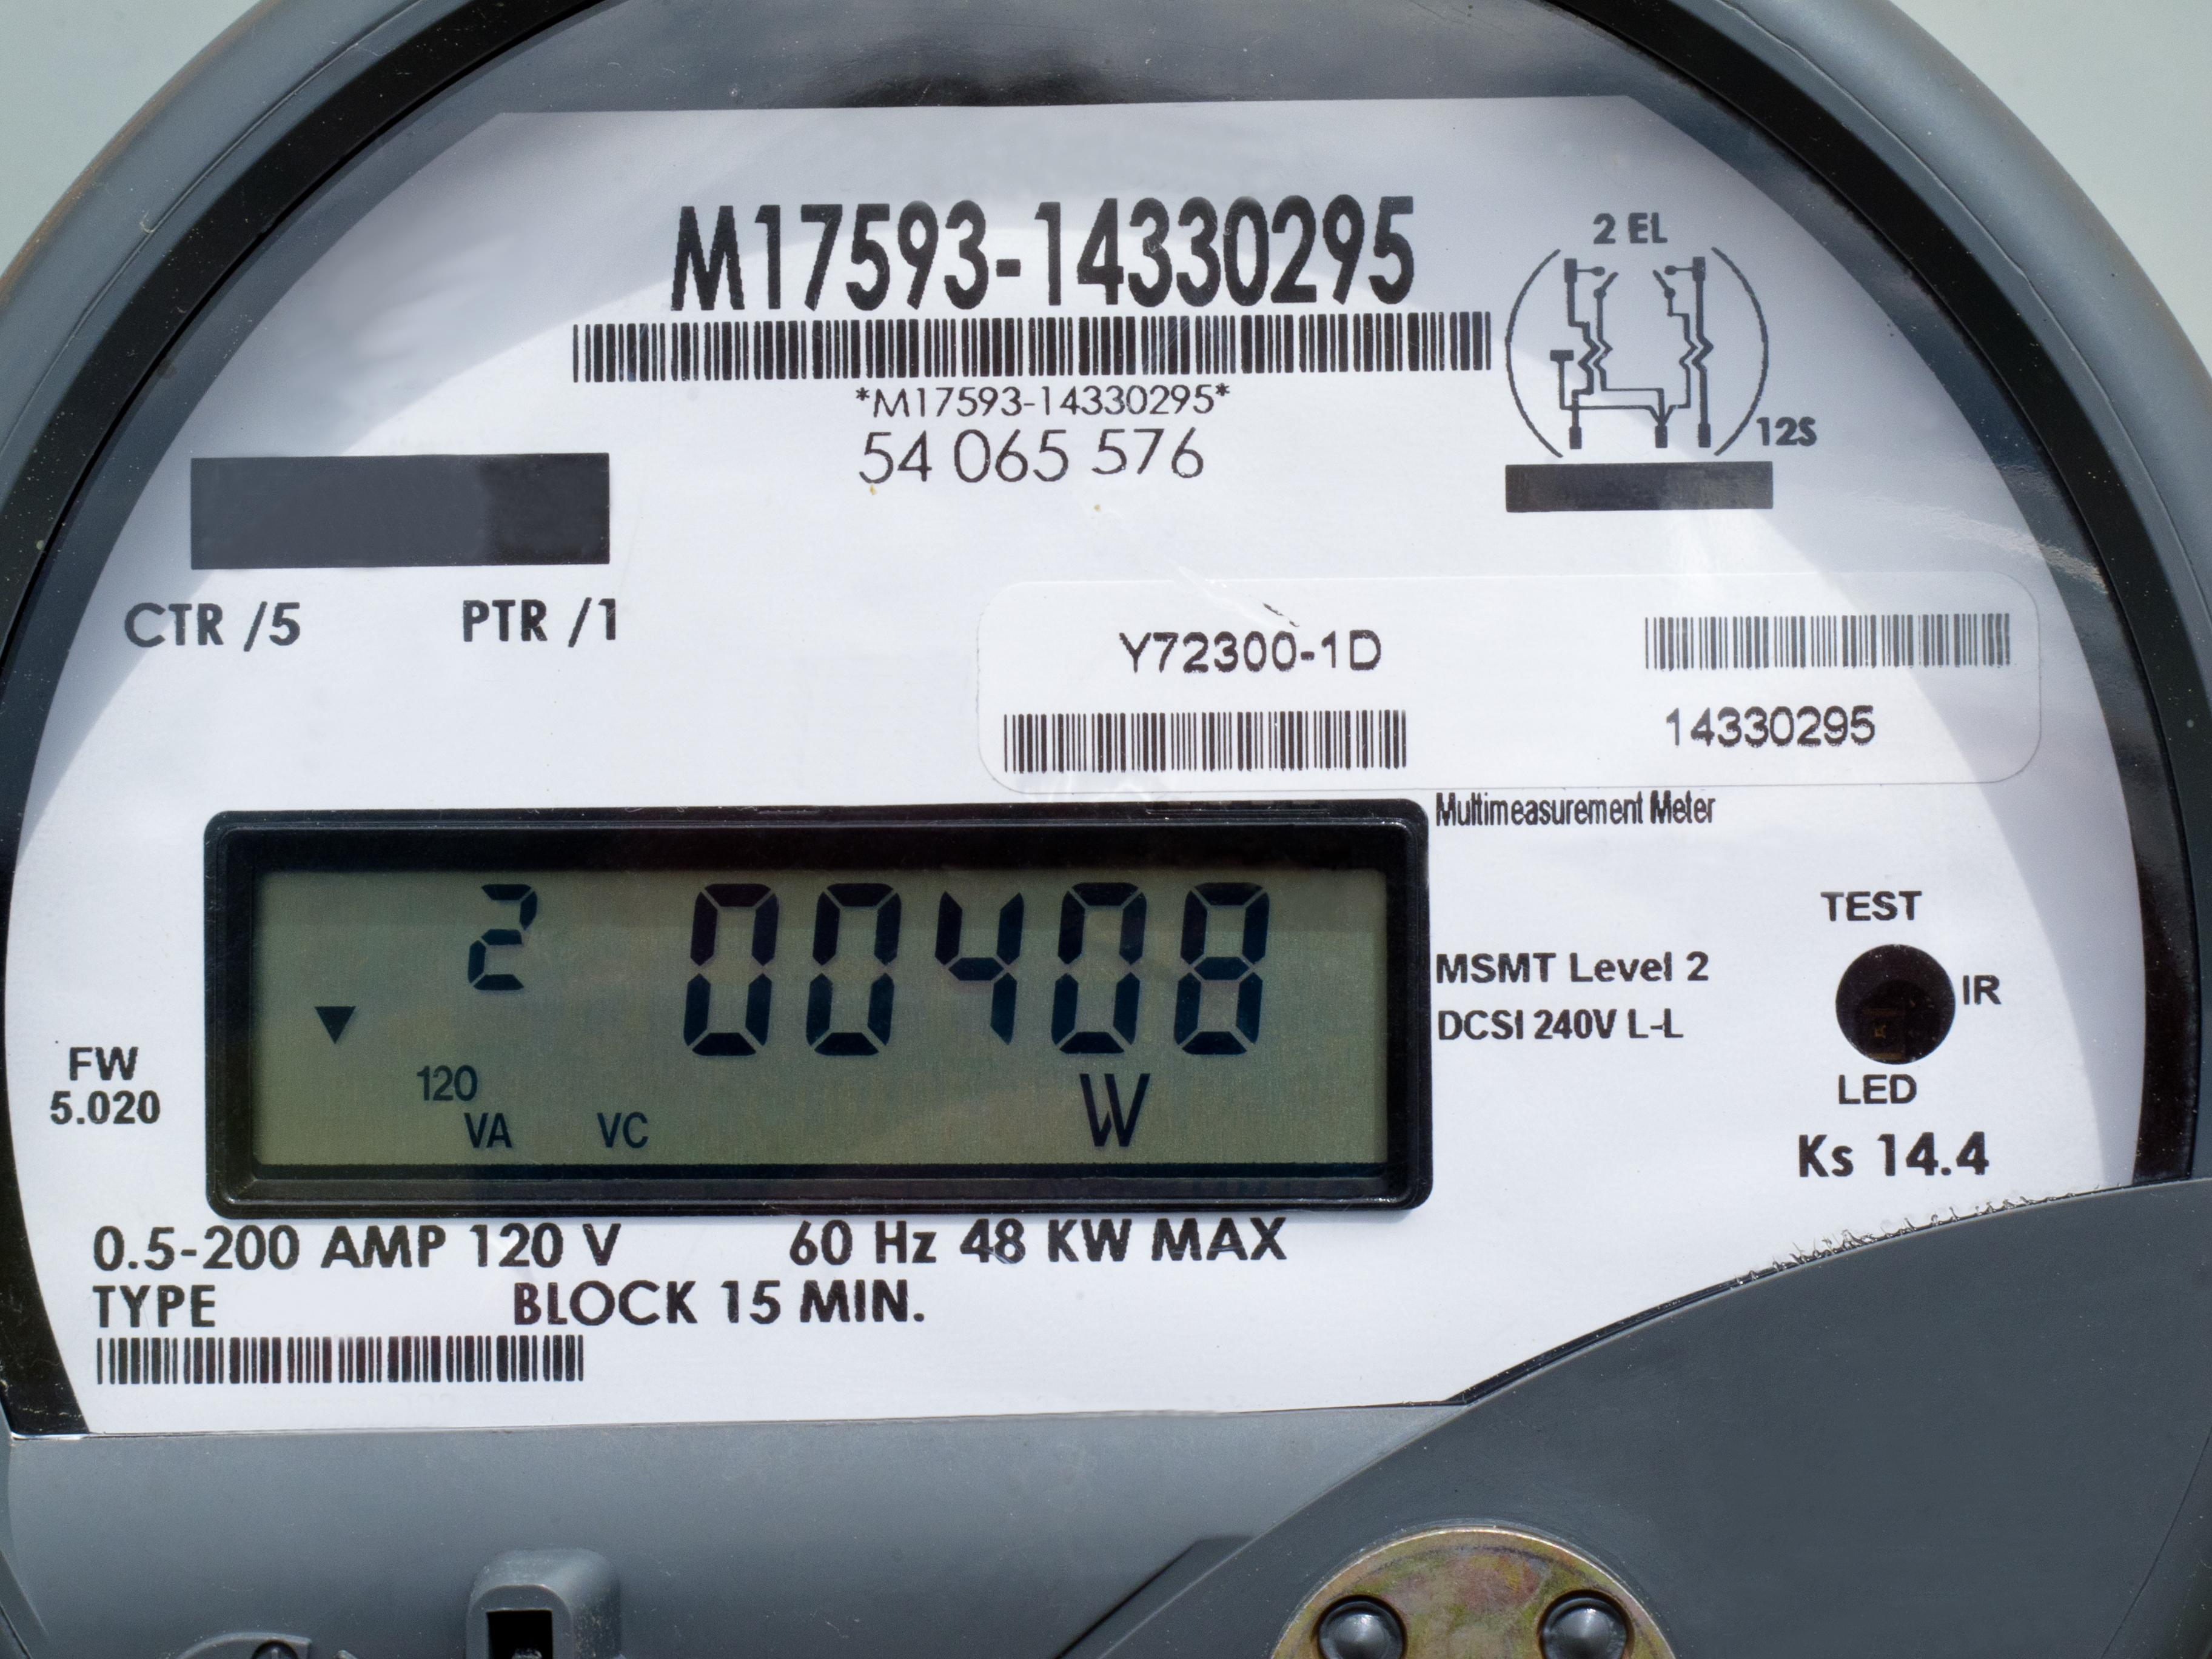 Presently Valued at USD 1.463 Billion, Smart Meter Industry has Potential to reach USD 18.6 Billion